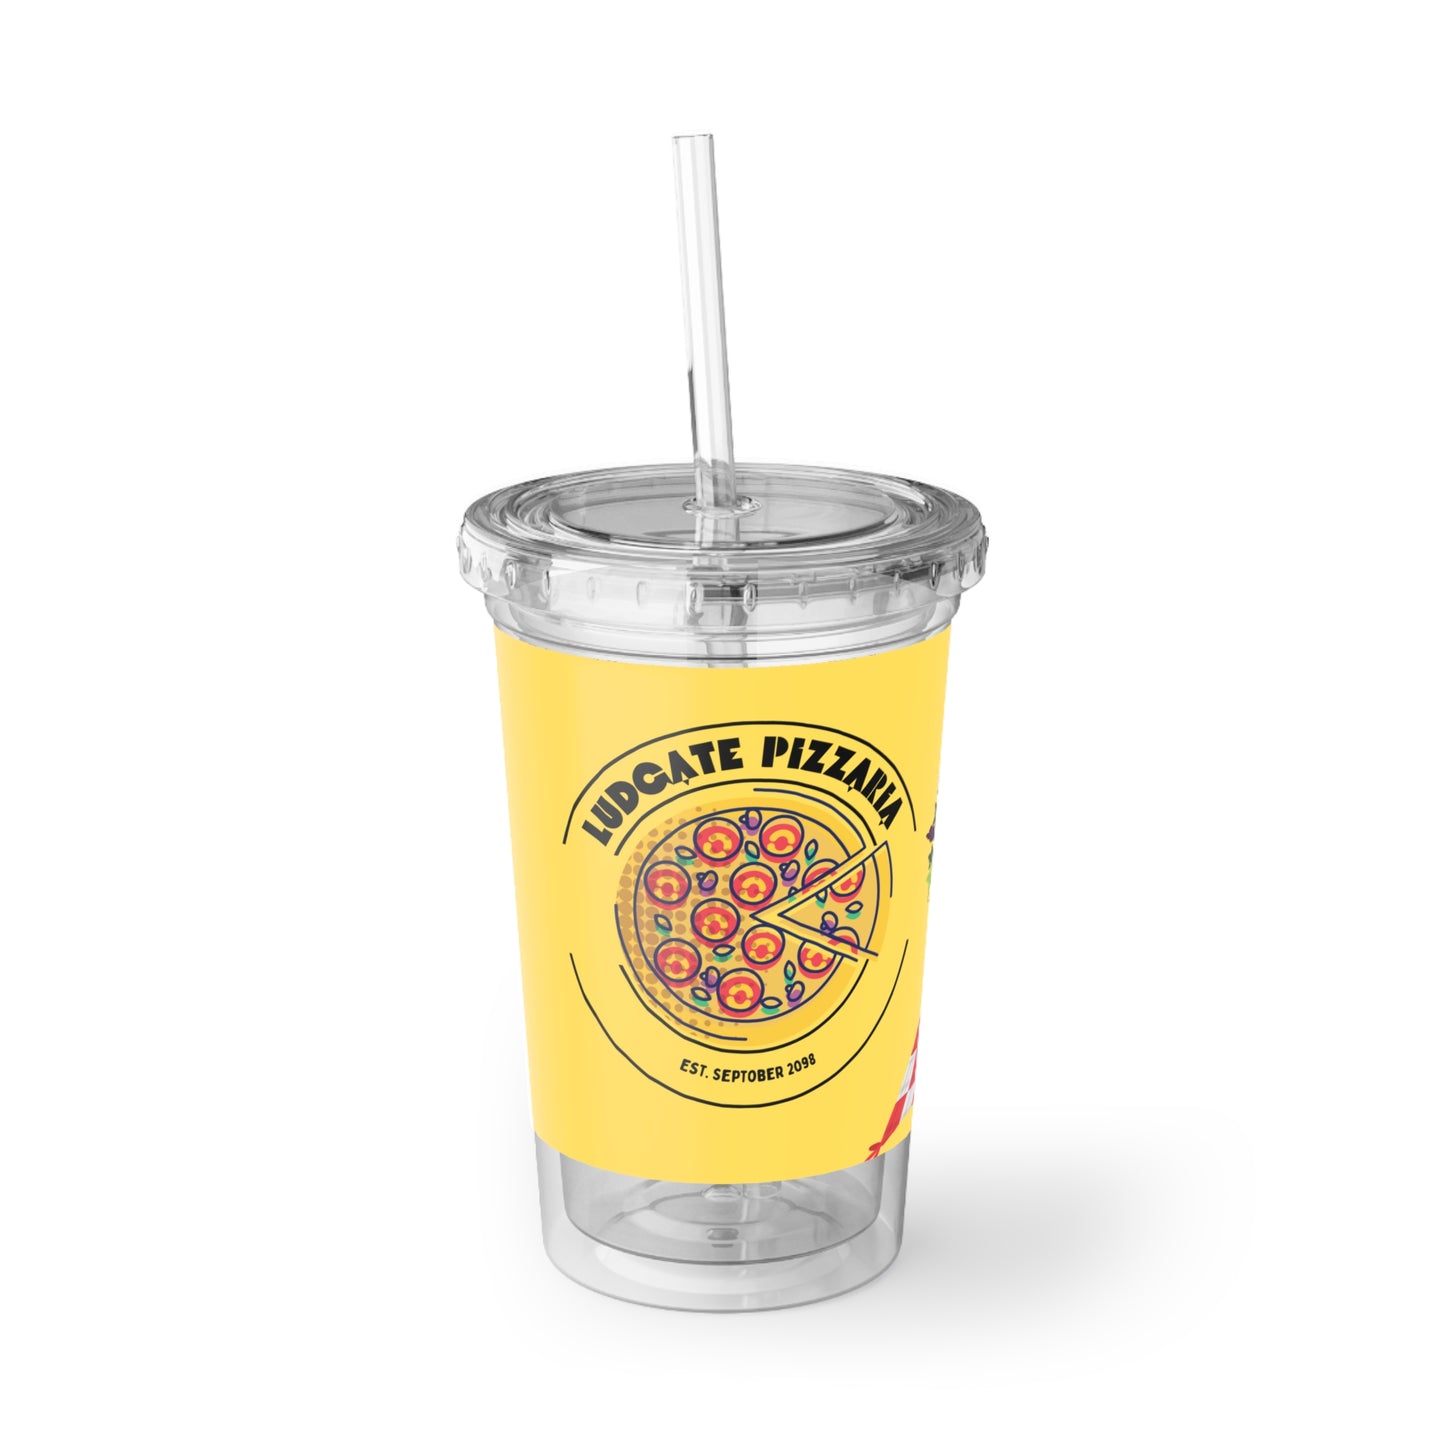 Ludgate pizzaria cup, motivational cup /BPA approved cup, motivational, inspirational gift cup